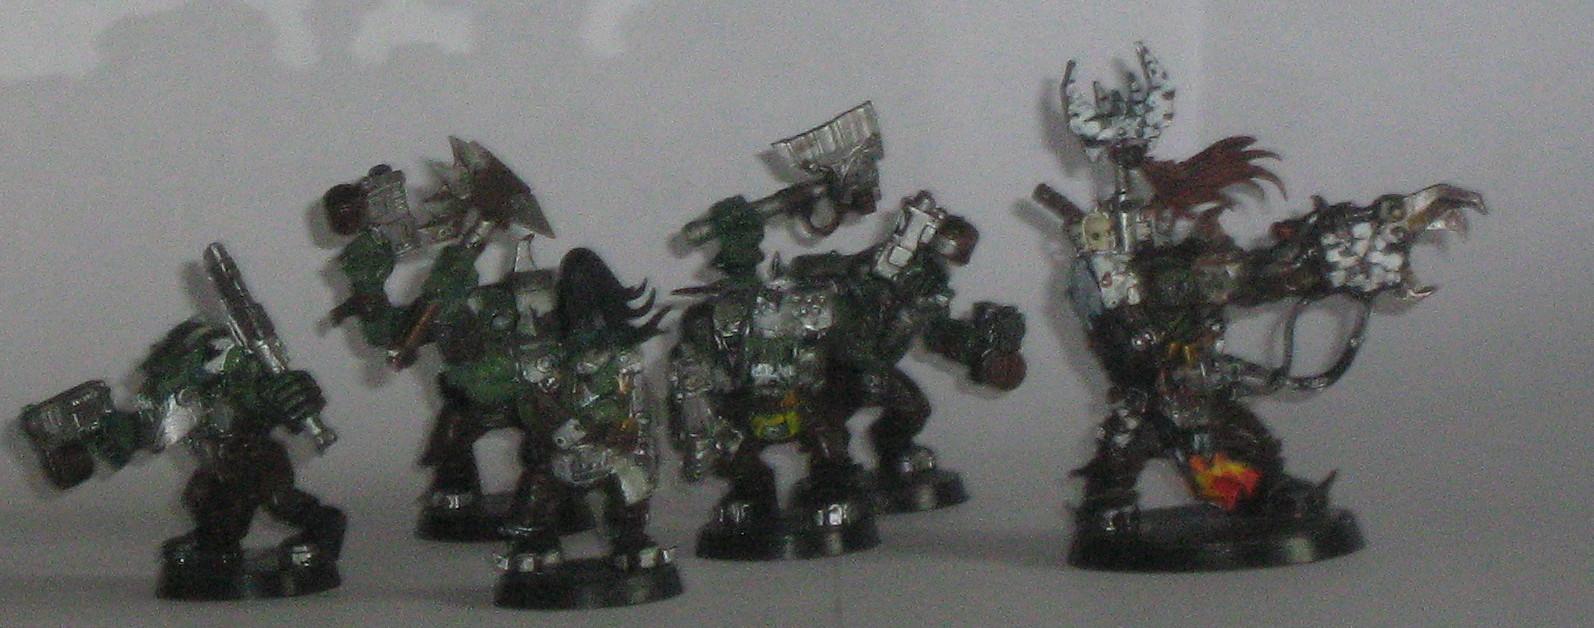 my badly painted (and conditioned) nobs and warboss